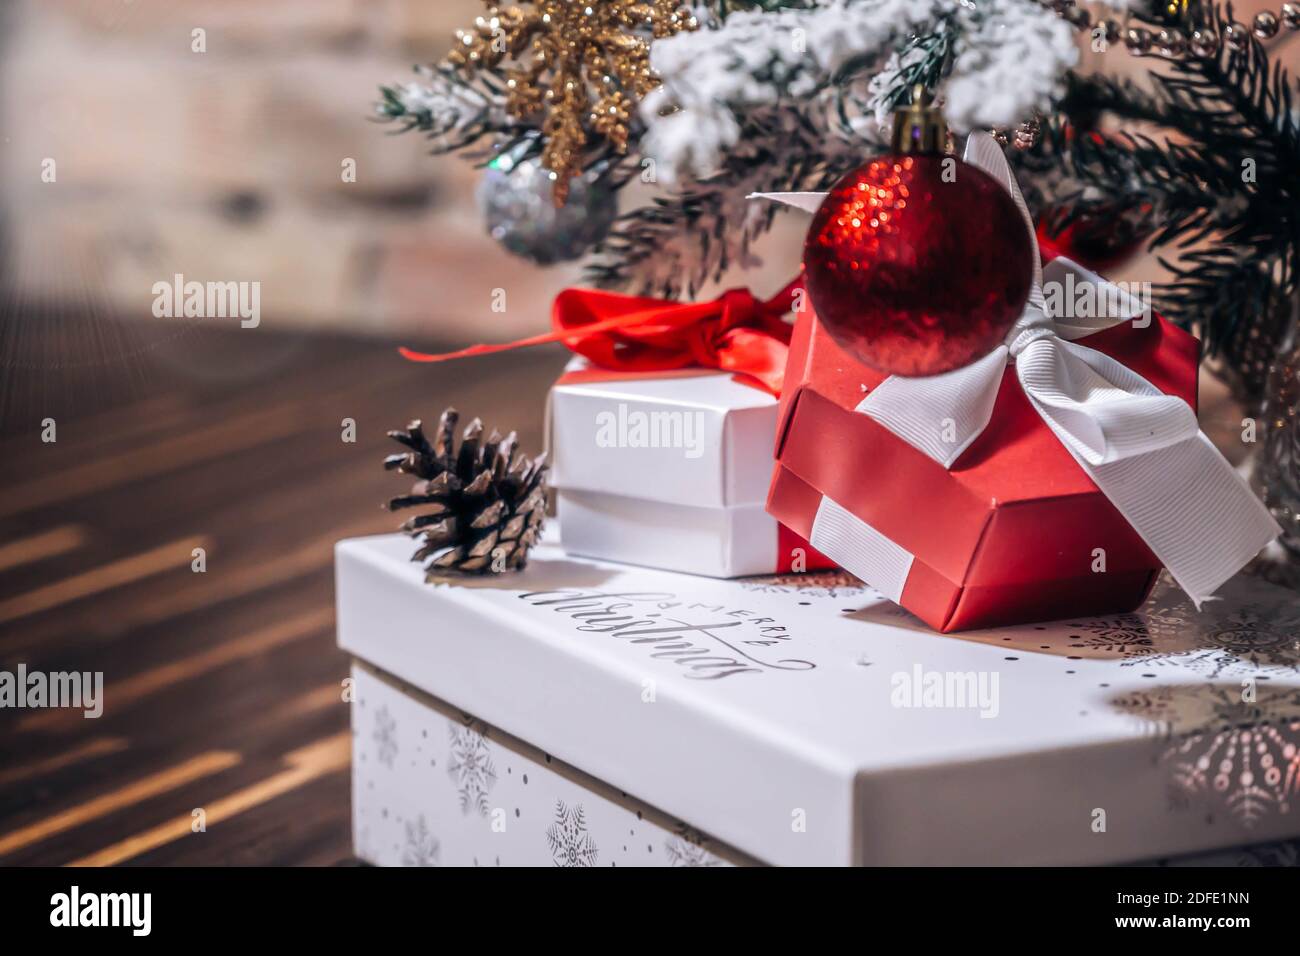 Christmas presents under the tree. Christmas Gifts. Background with Christmas gifts under Christmas tree isolated on a wooden background. Copy space. Stock Photo